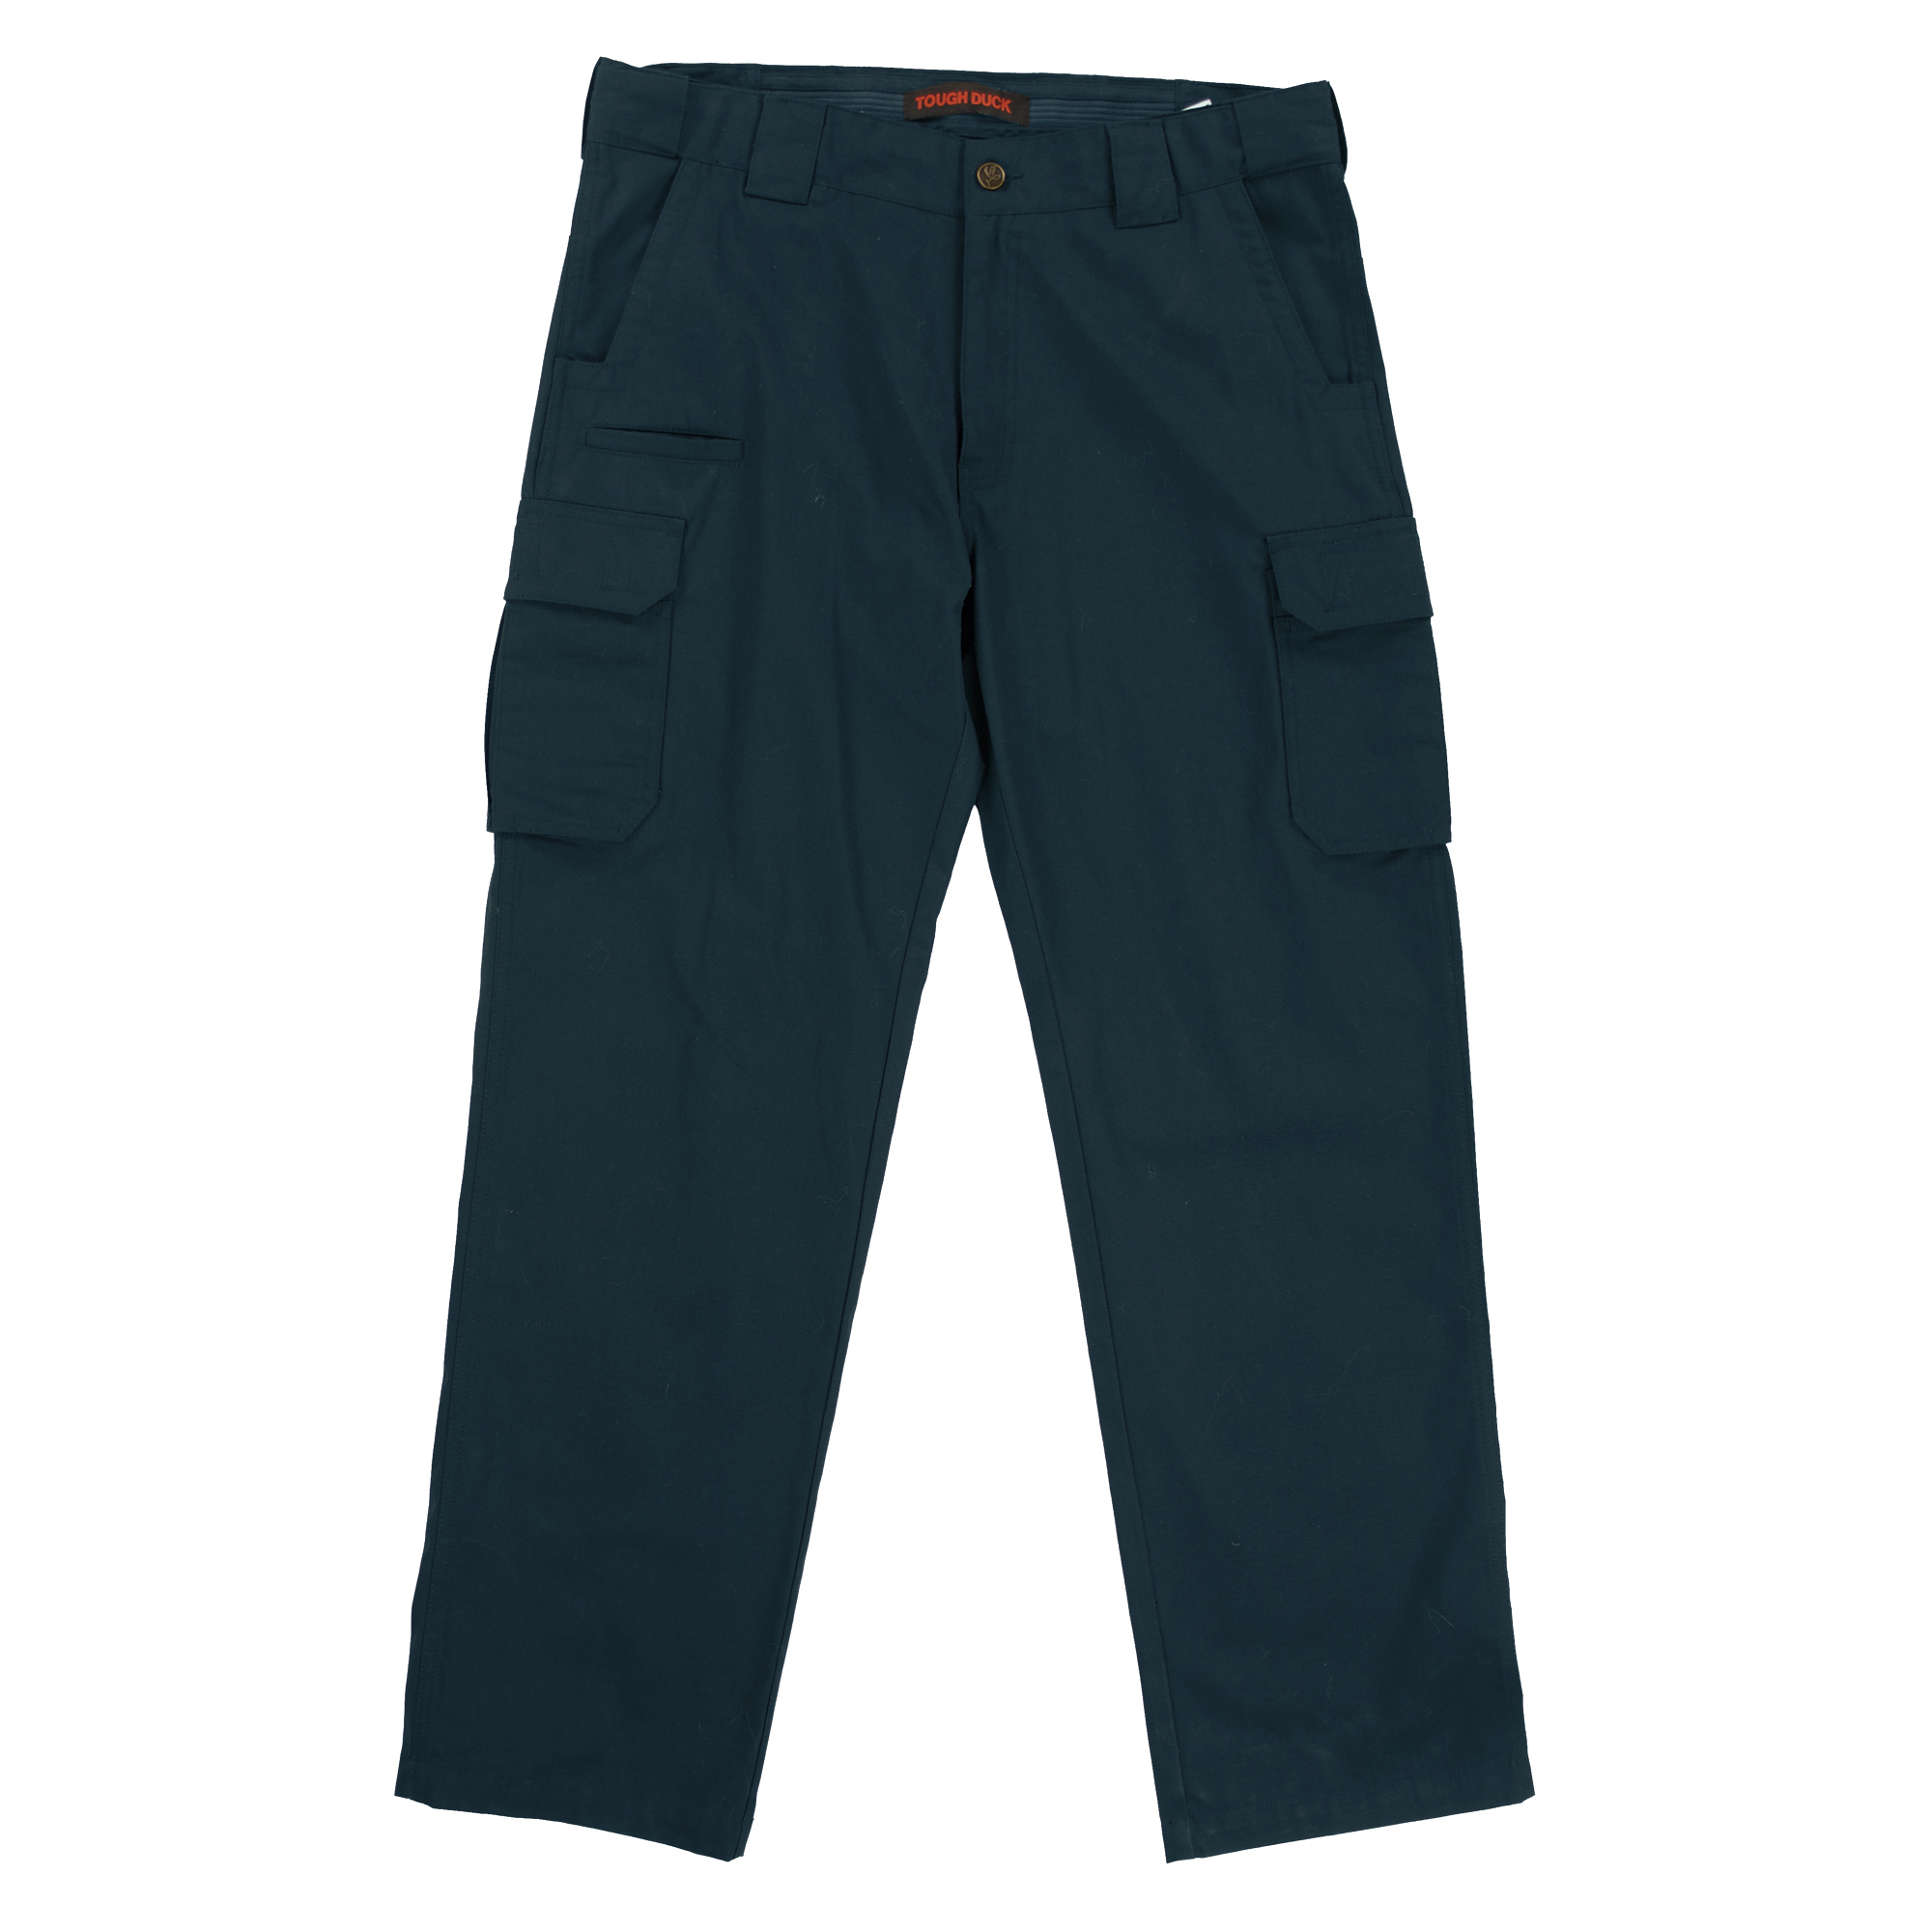 Tough Duck, Ripstop Cargo Pant, Waist 44 in, Inseam 30 in, Color Navy, Model WP110